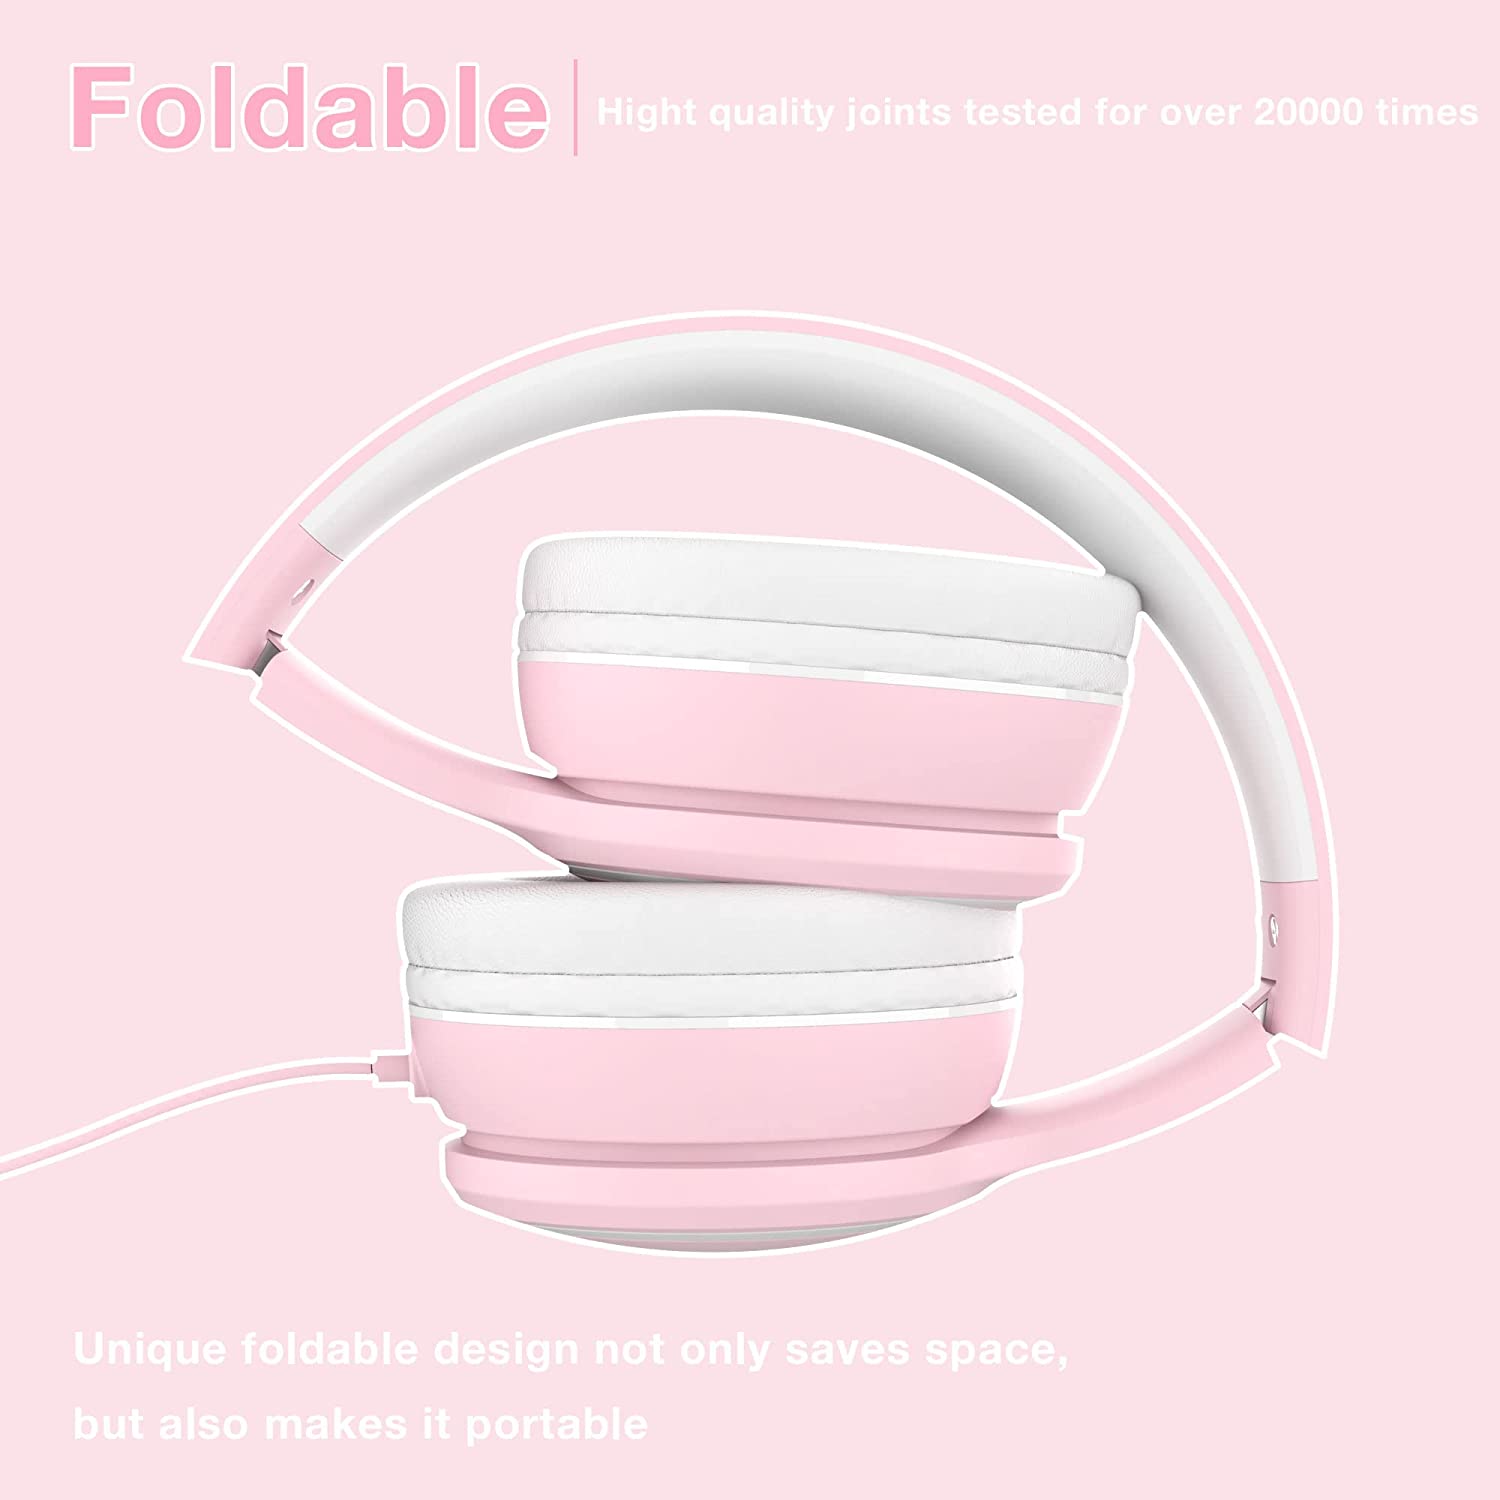 Rockpapa E9W Foldable Wired Headphones with Microphone